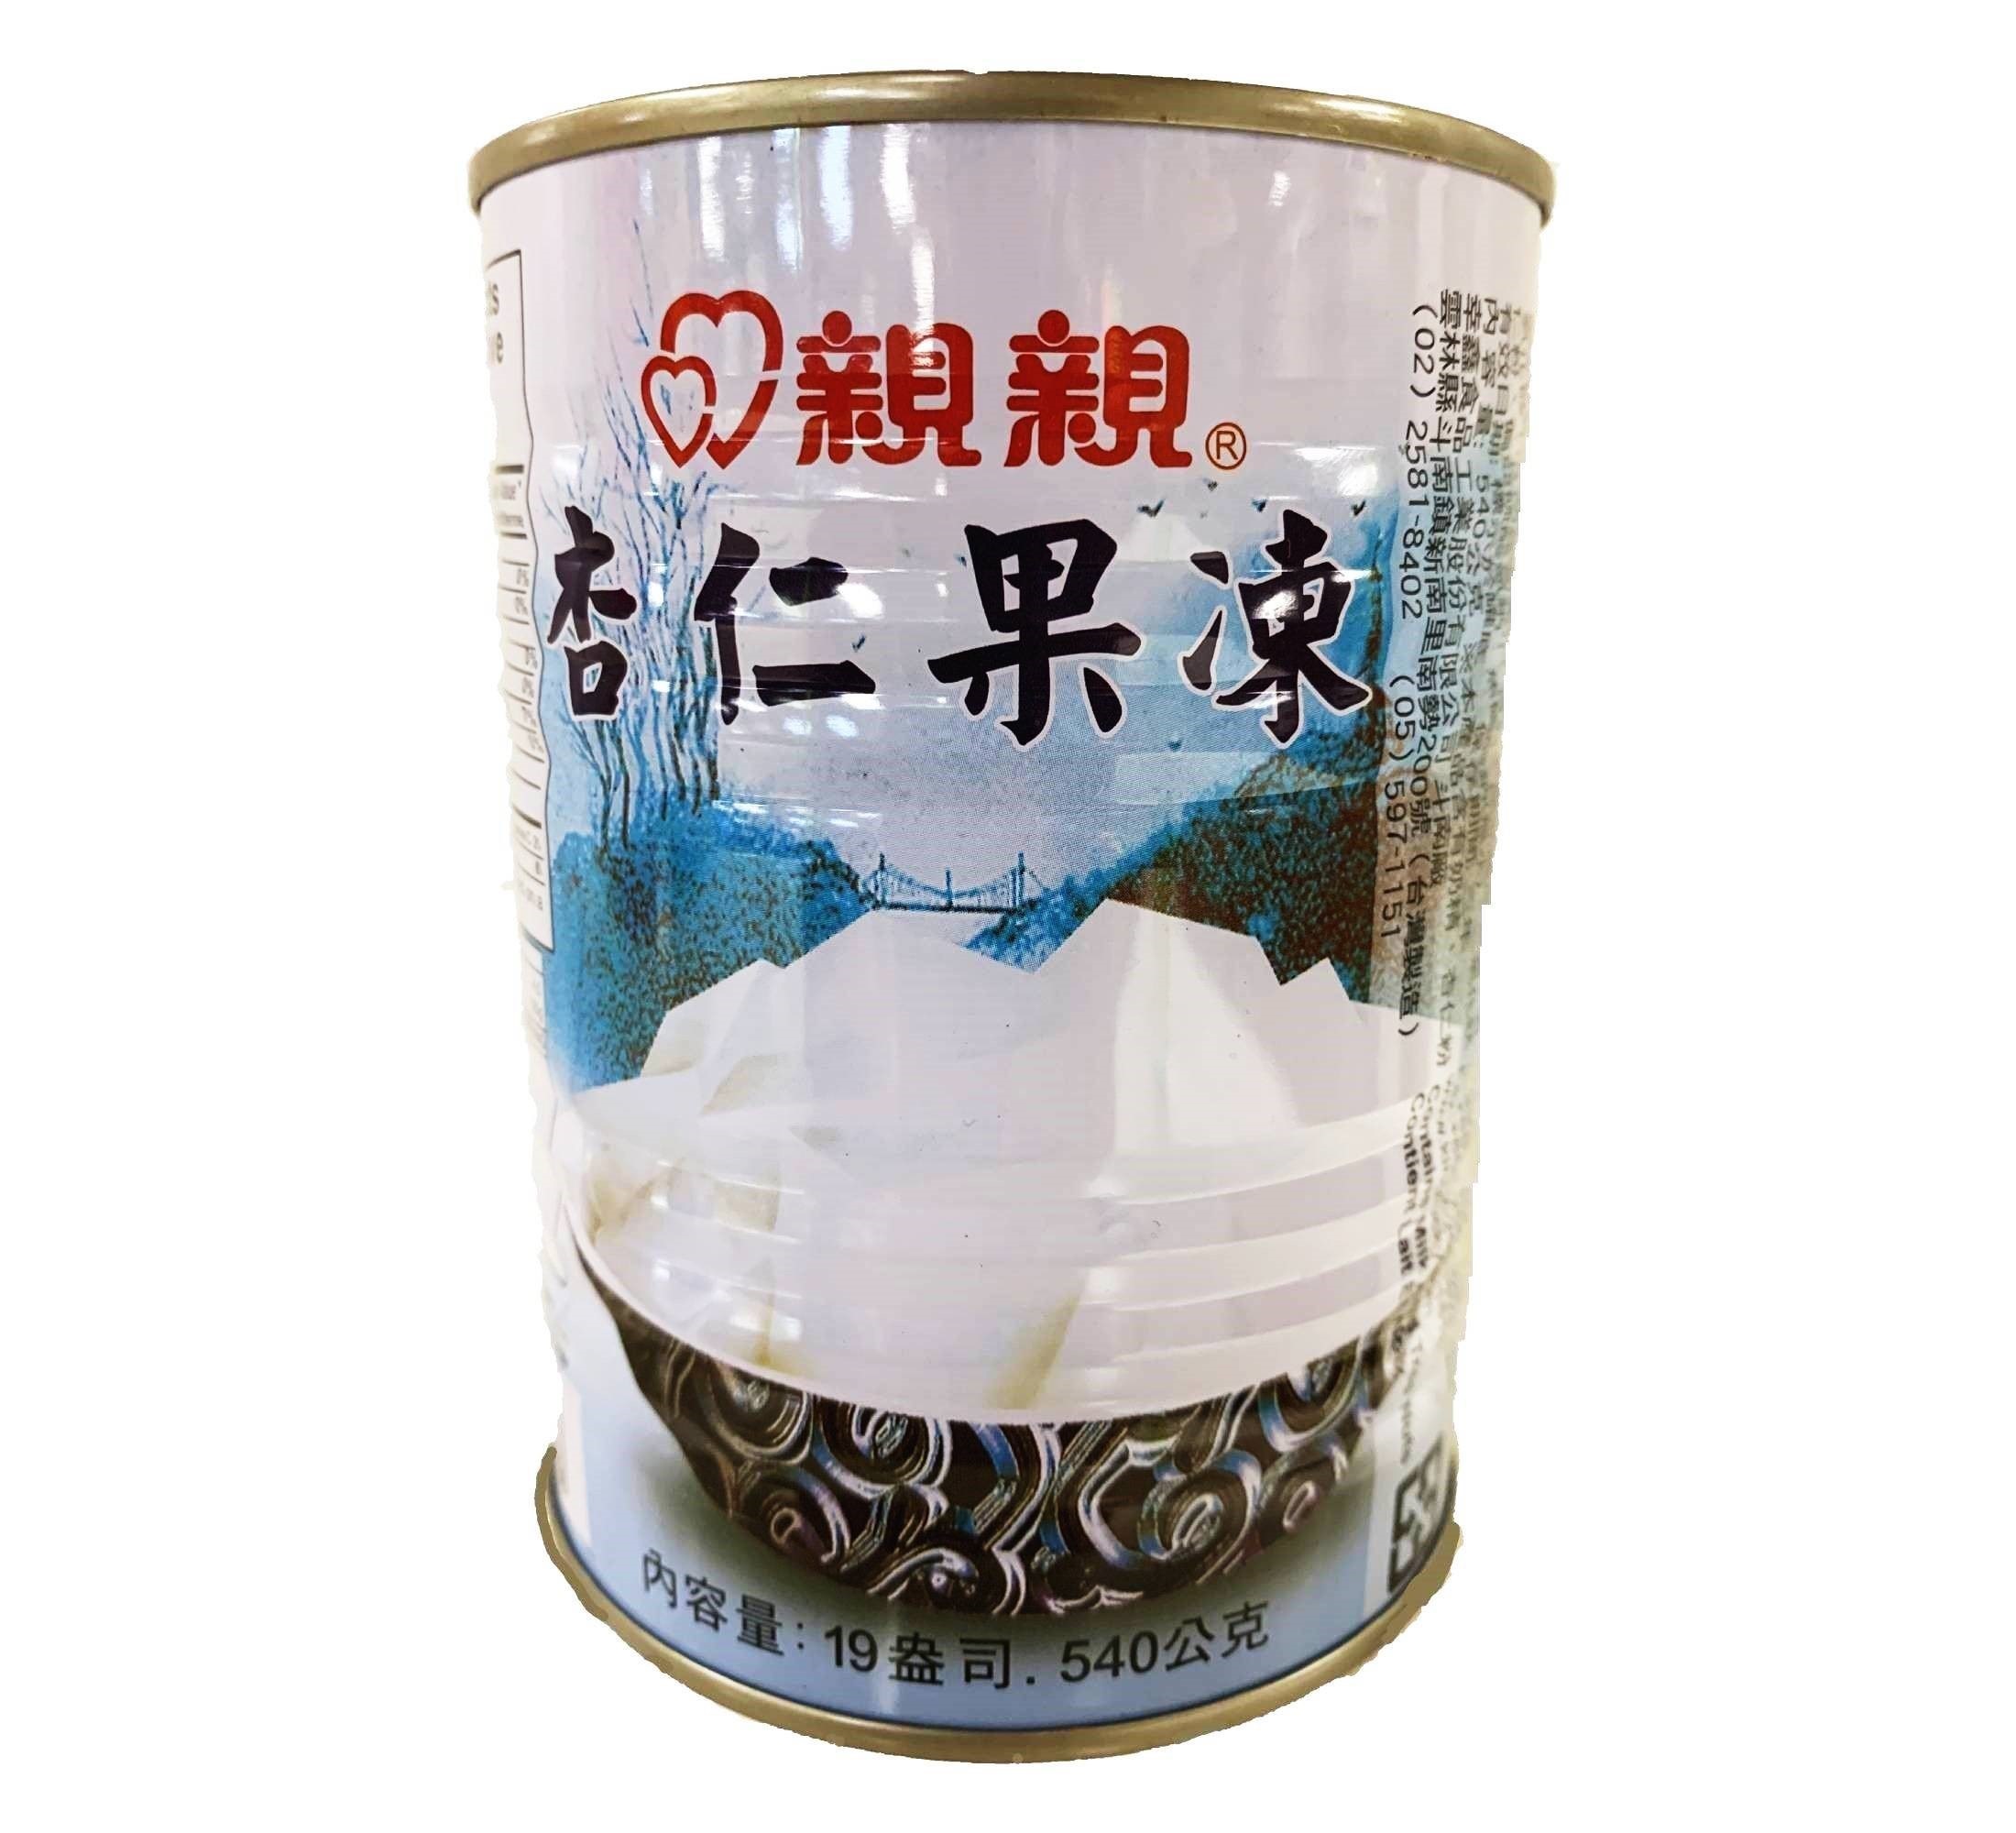 CHIN CHIN ALMOND JELLY DR110190